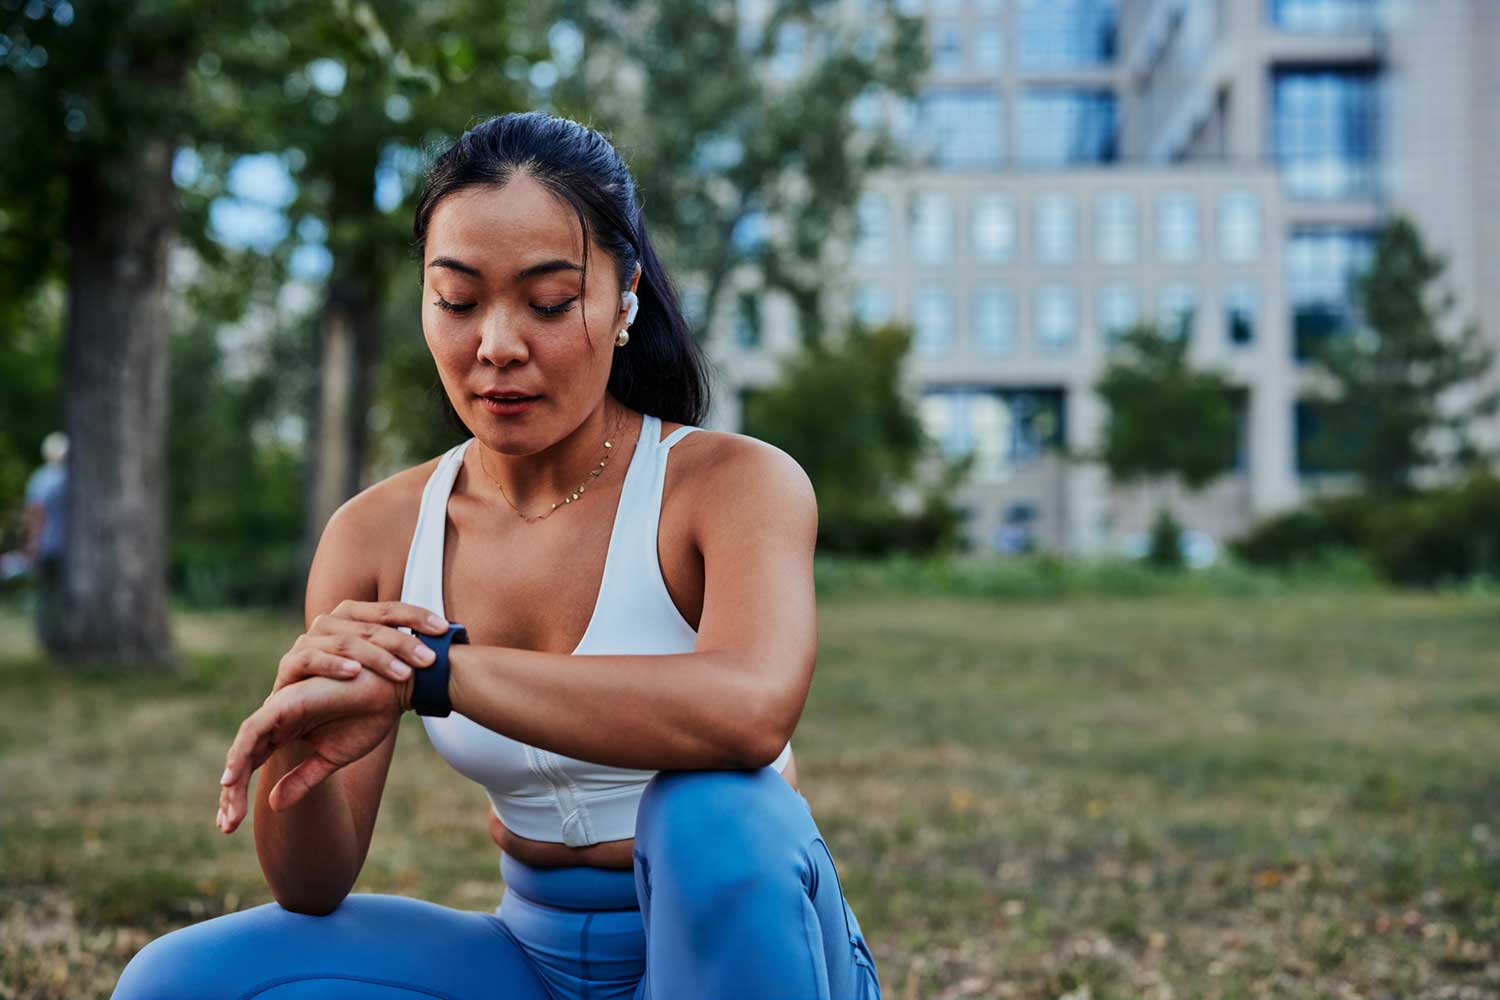 A photograph of a person wearing workout clothes in a park kneeling down to check their smart watch.